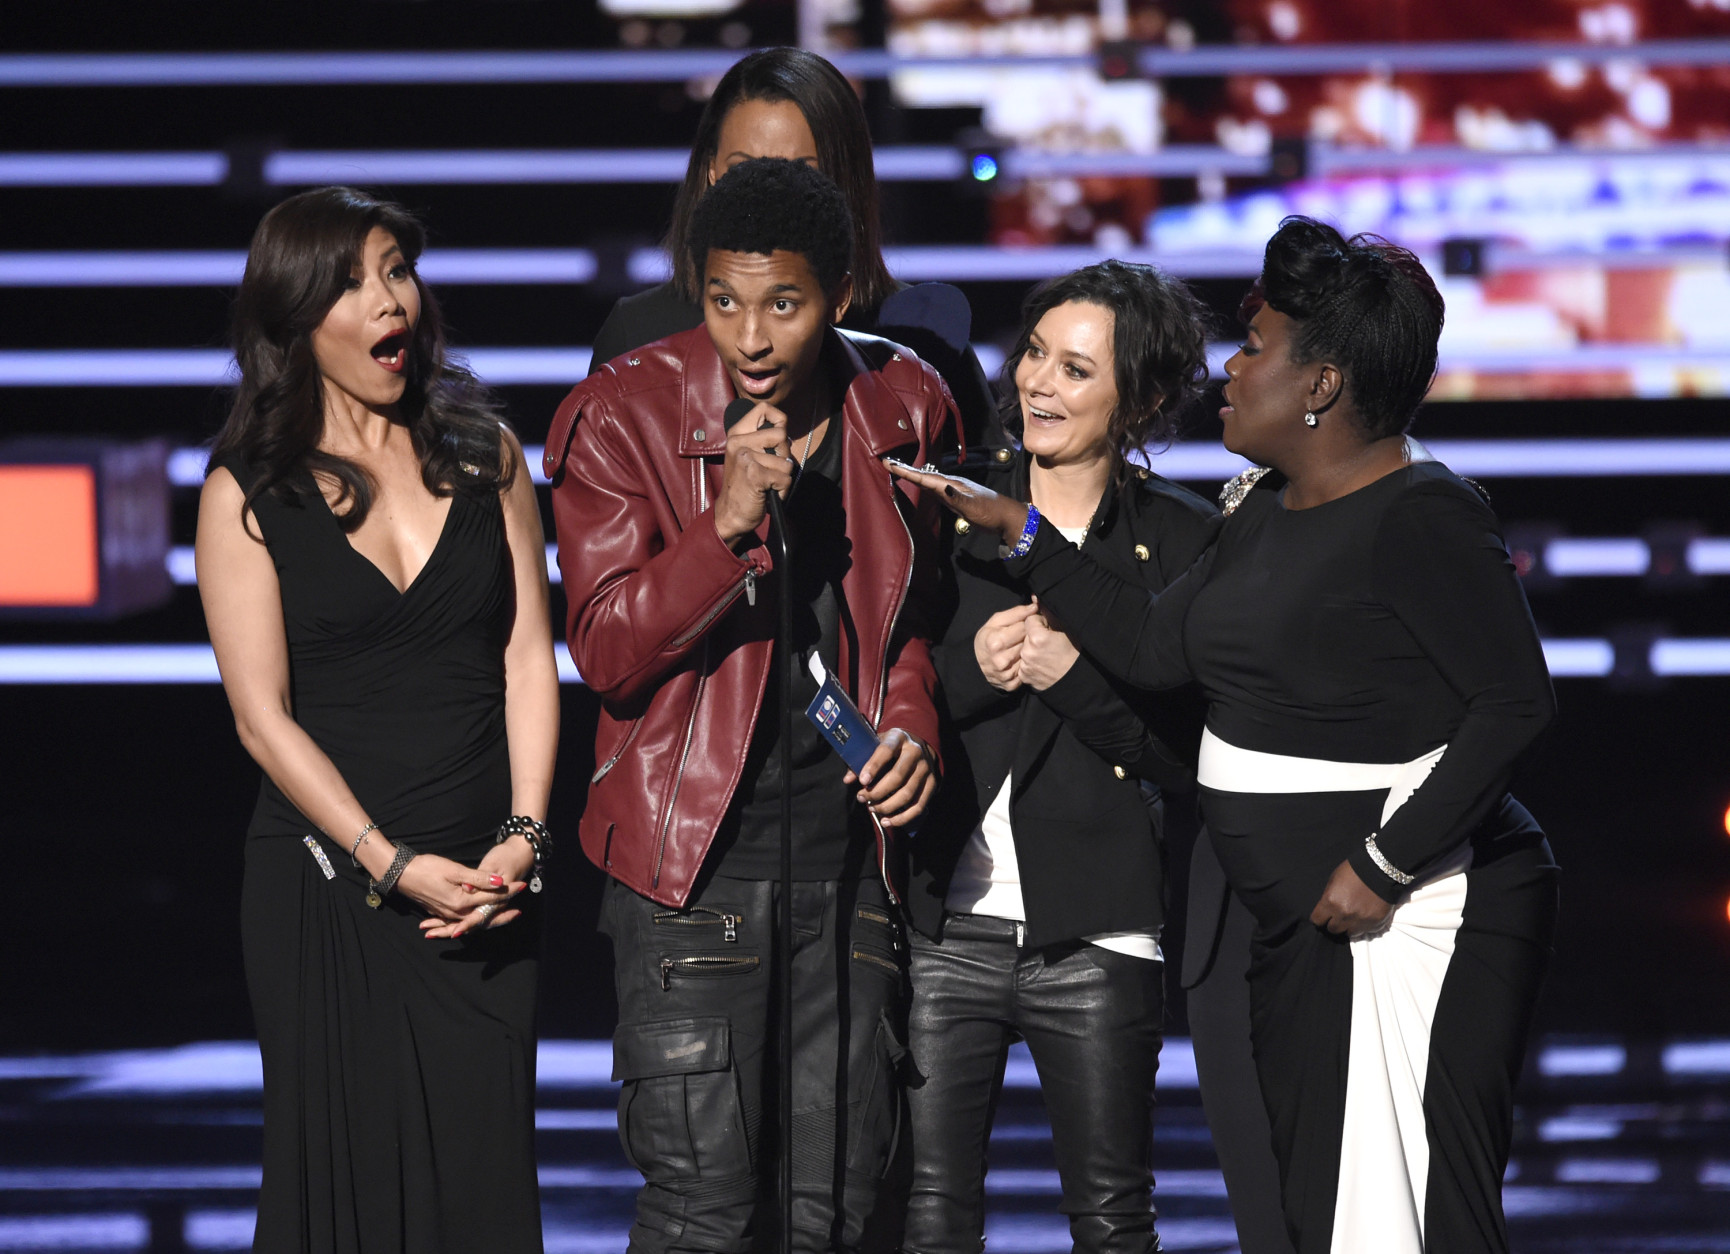 An unidentified guest speaks on stage while Julie Chen, Aisha Tyler, and Sheryl Underwood accept the award for favorite daytime TV hosting team for The Talk at the People's Choice Awards at the Microsoft Theater on Wednesday, Jan. 6, 2016, in Los Angeles. (Photo by Chris Pizzello/Invision/AP)